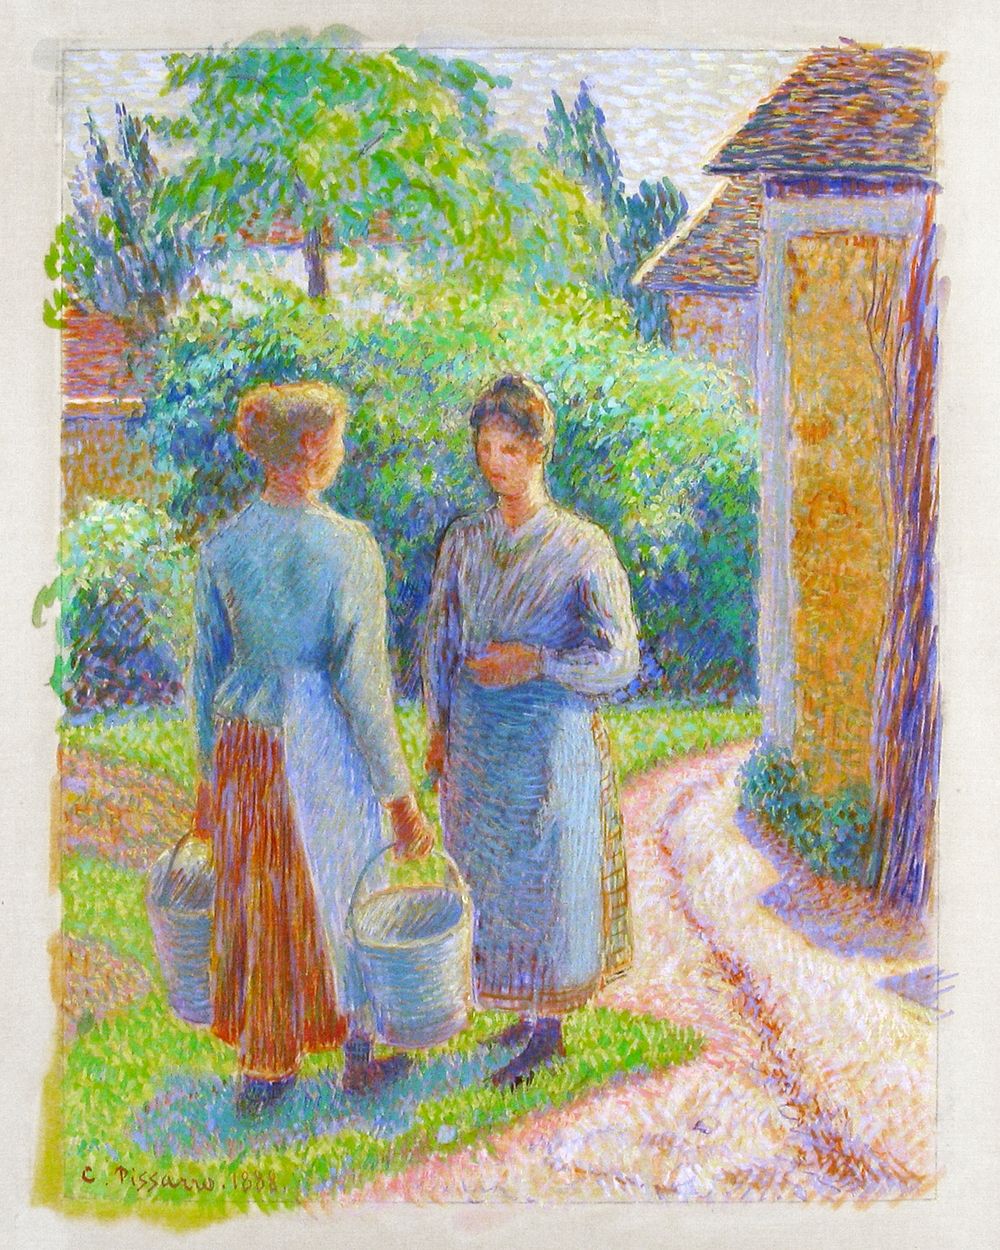 Two Women in a Garden (1888) by Camille Pissarro. Original from The MET museum. Digitally enhanced by rawpixel.